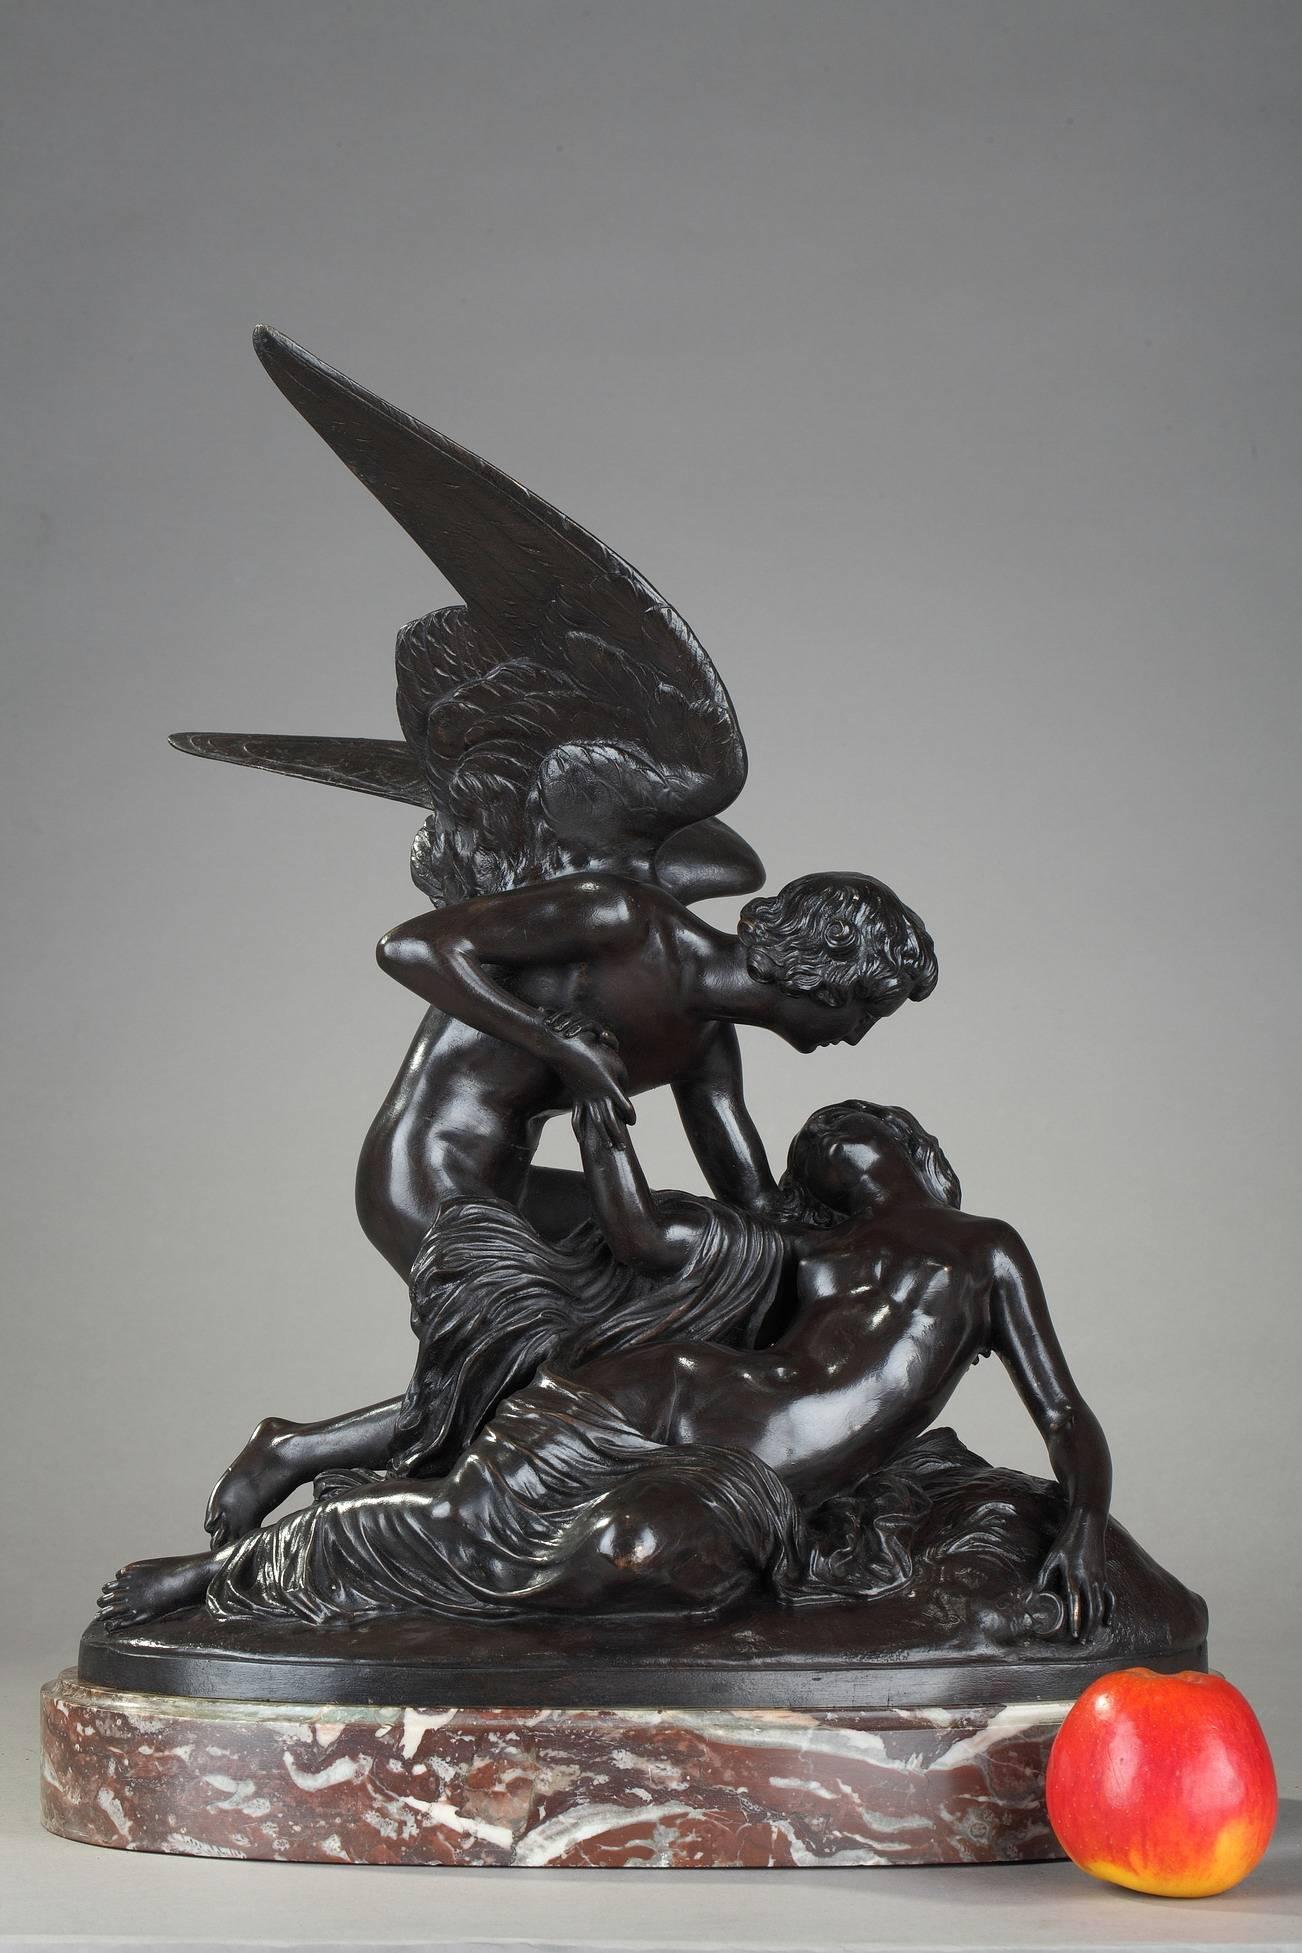 Bronze sculpture with brown patination after the famous group "Psyche Revived by Cupid's Kiss" by Antonio Canova (1757-1822). This winged young man who has just landed on a rock where a girl lies unconscious, is the god Eros (Cupid in